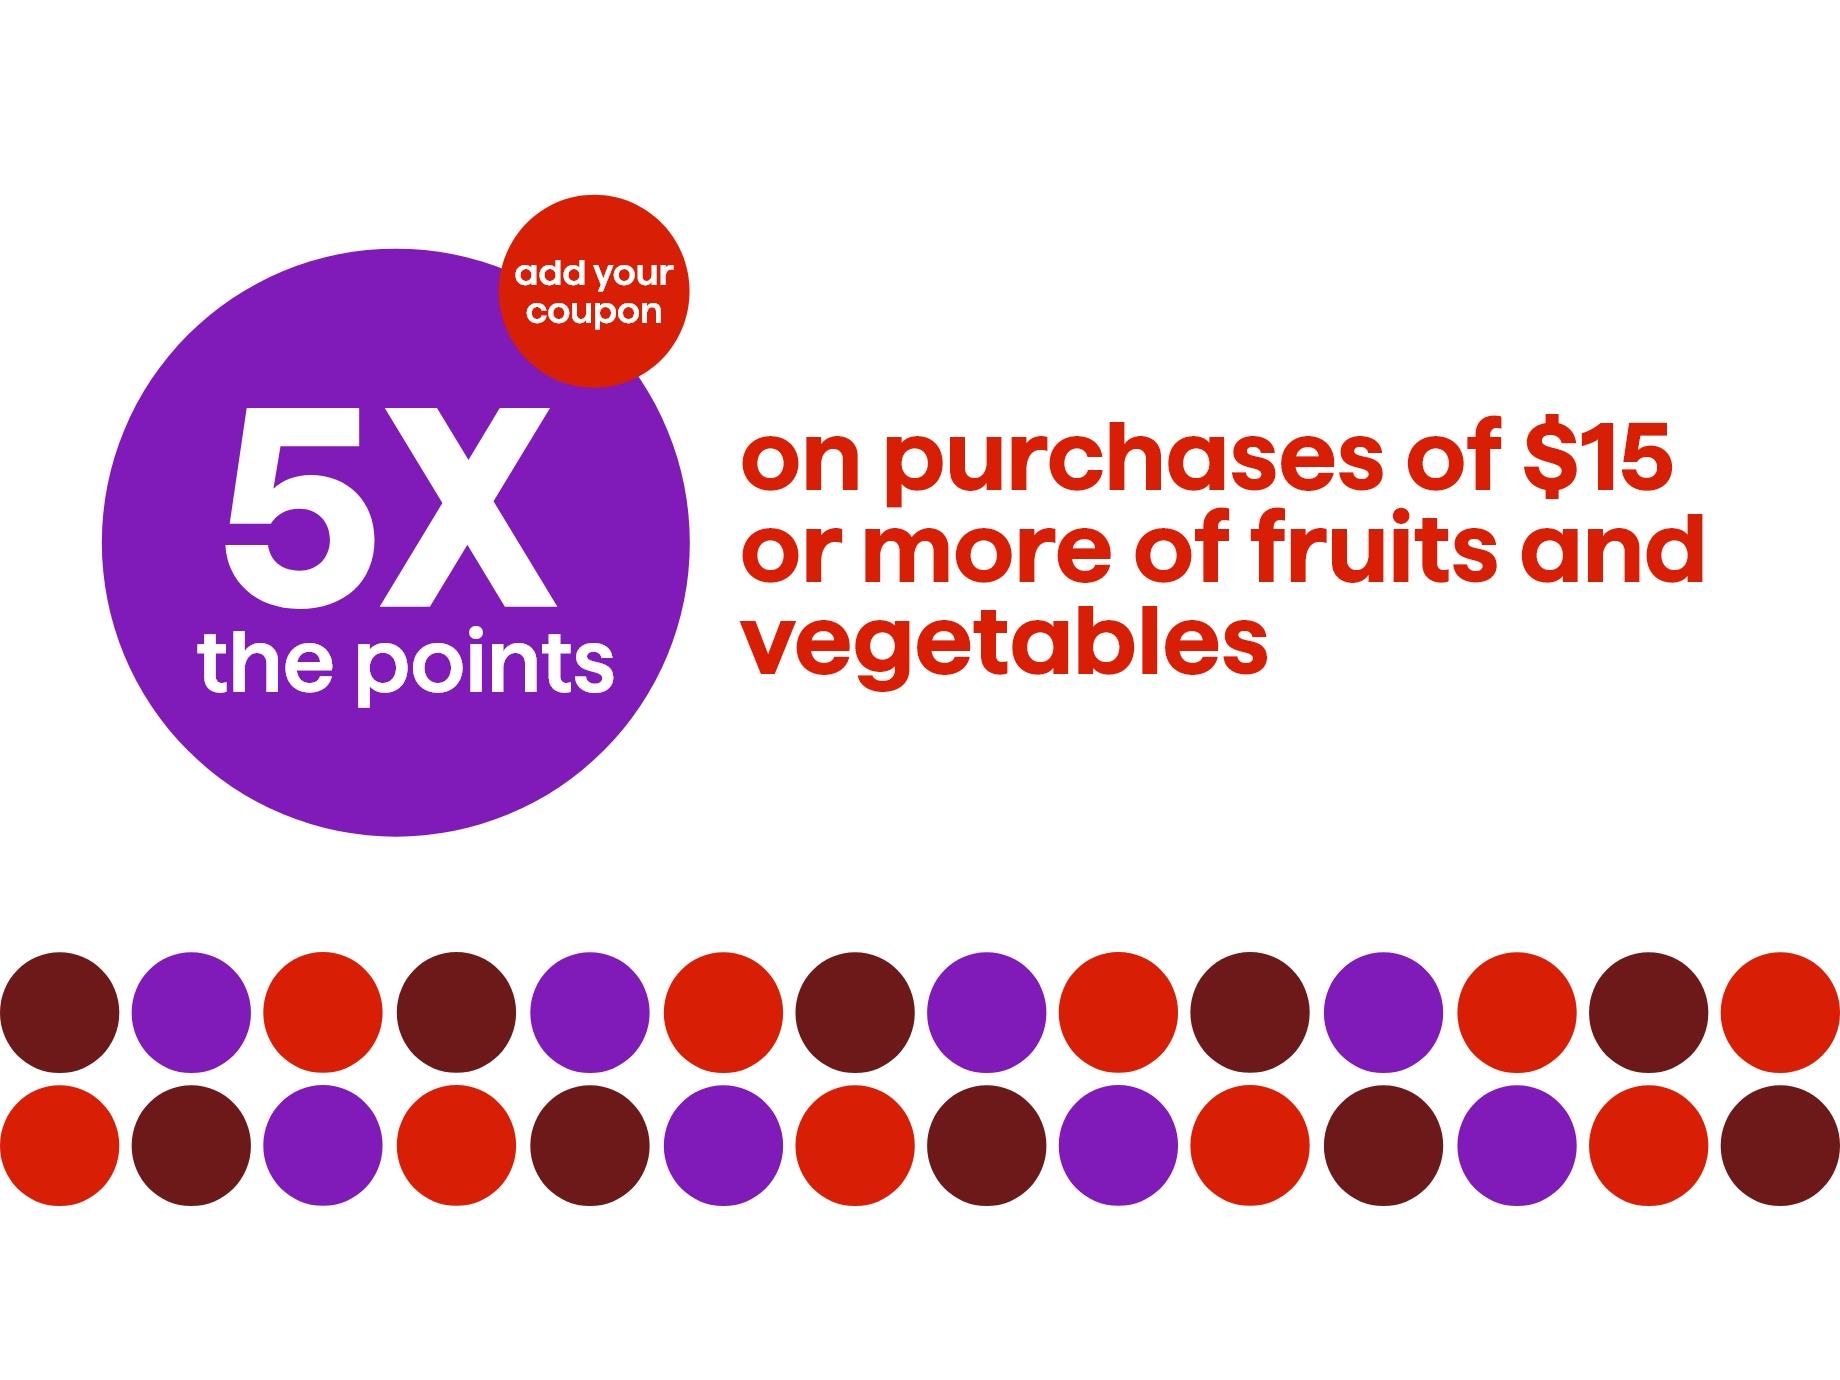 5x points on purchases of $15 or more of fruits and vegetables